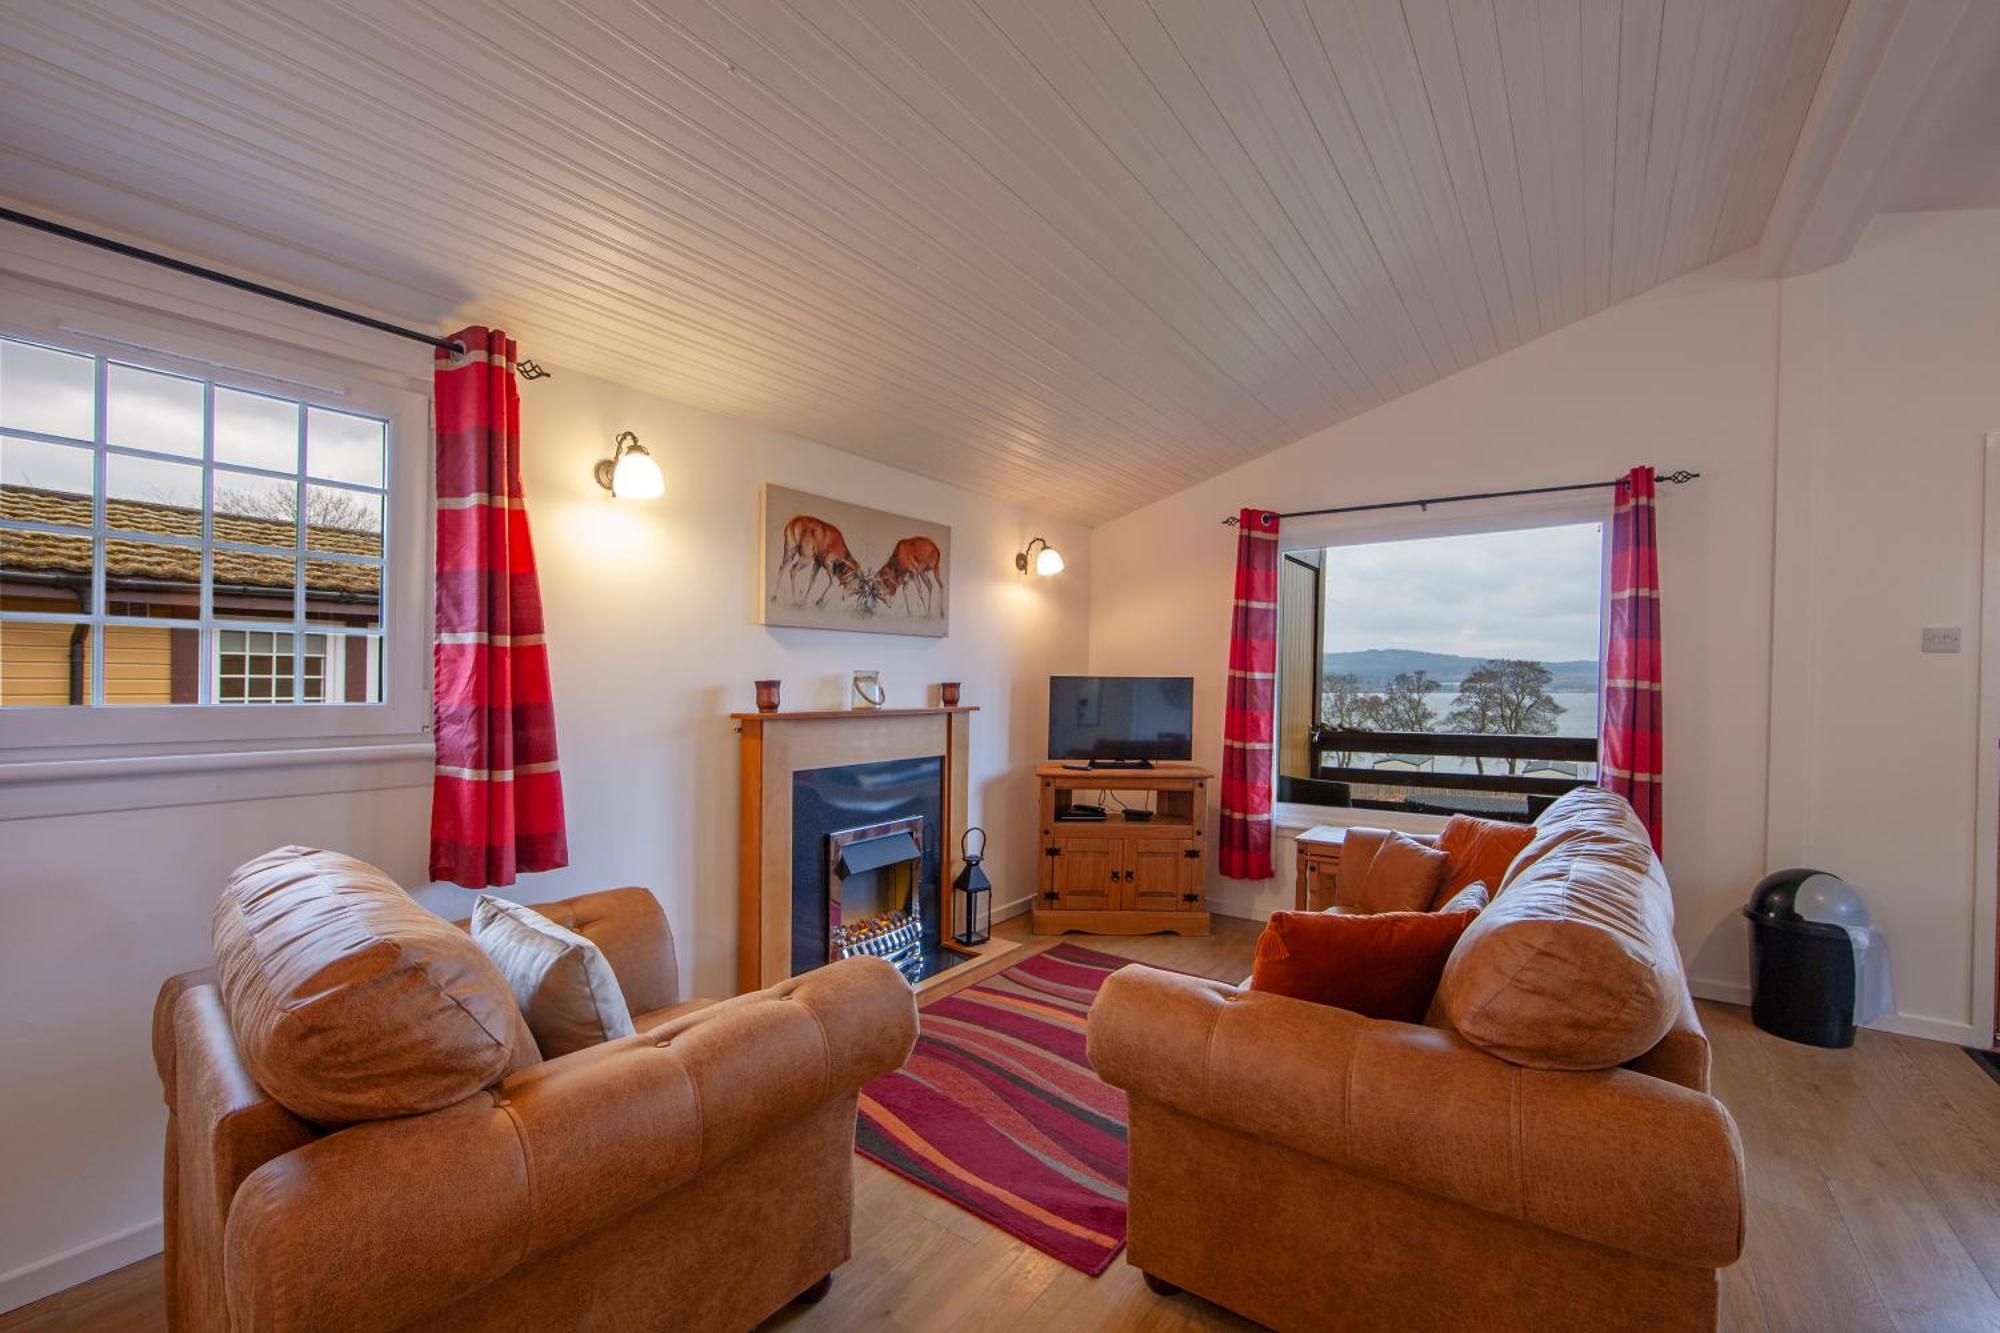 Appin Holiday Homes -Caravans, Lodges, Shepherds Hut And Train Carriage Stays 外观 照片